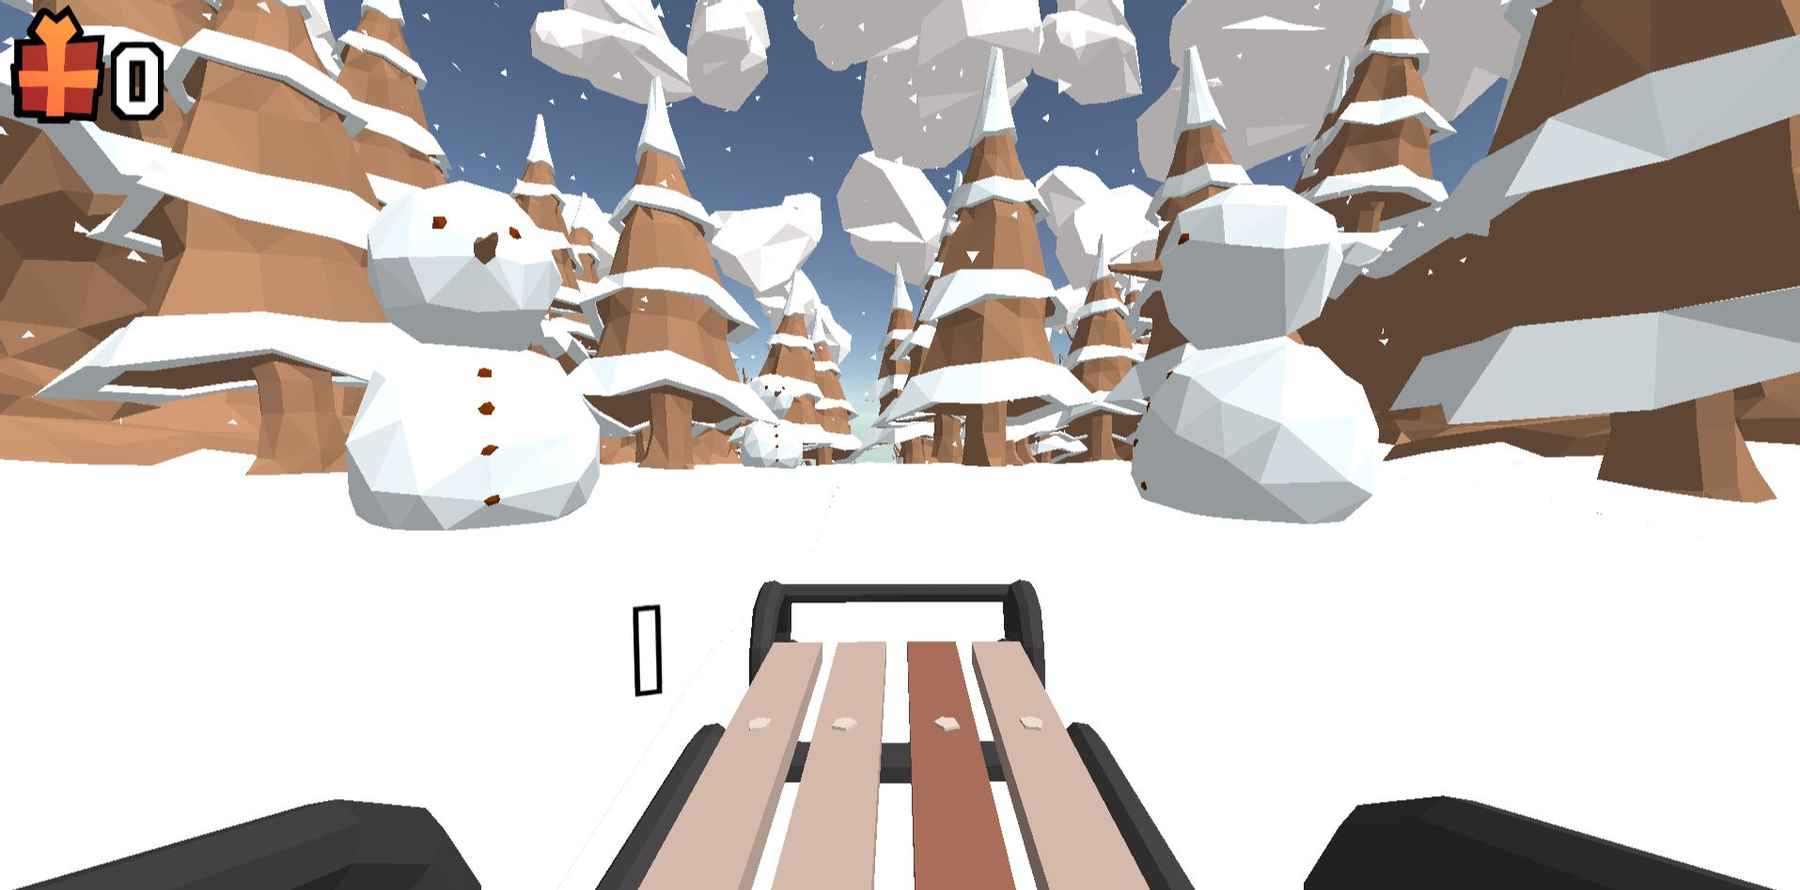 Snow Rider 3D Download APK for Android (Free) | mob.org